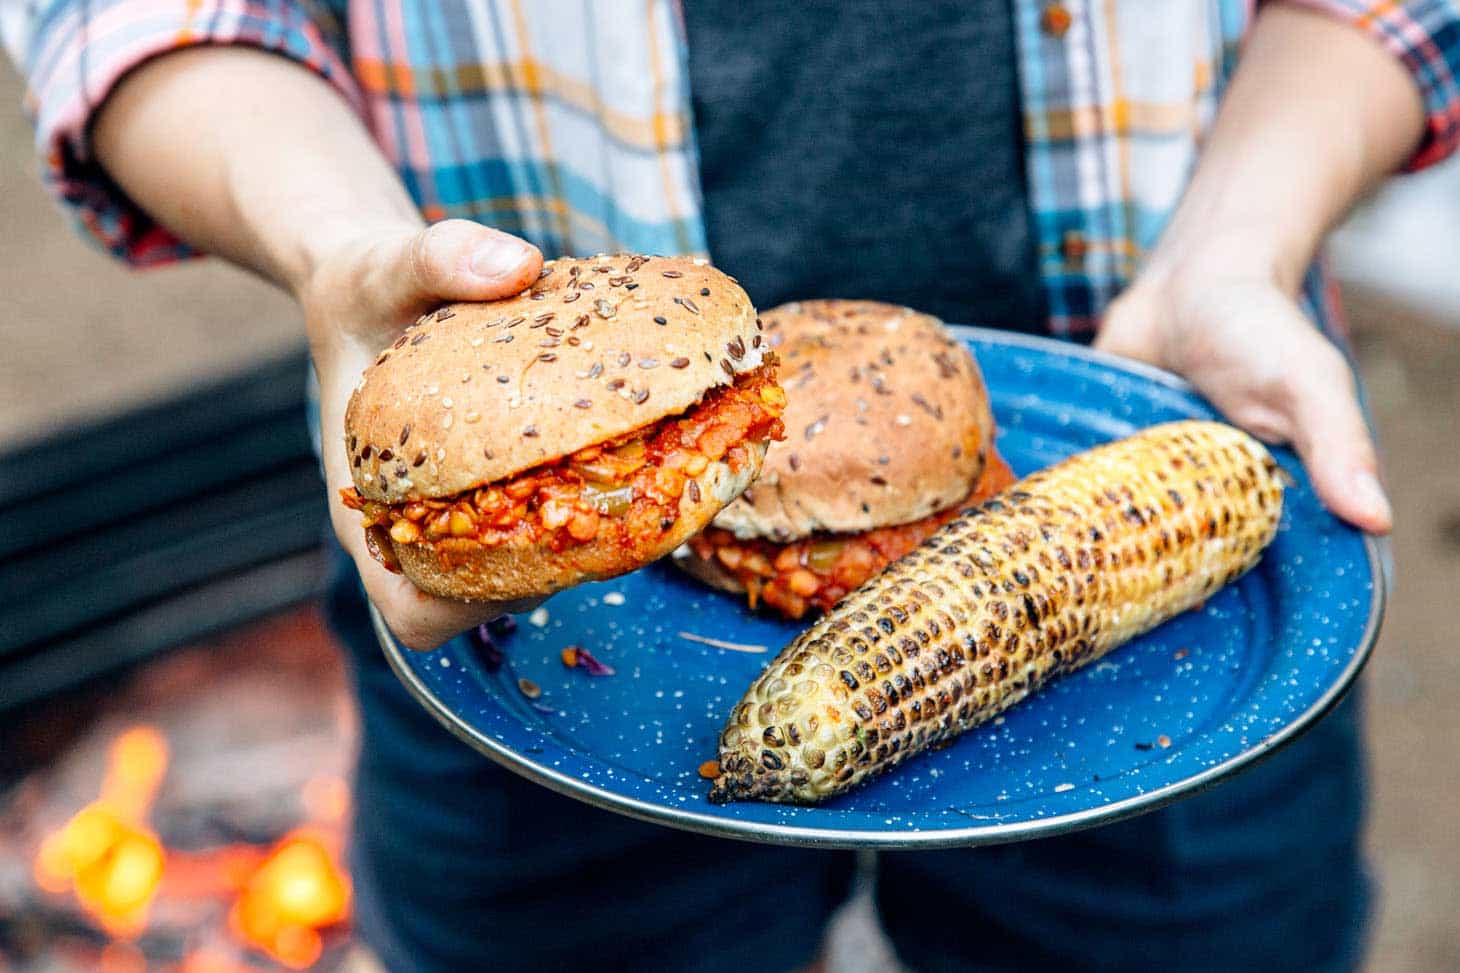 Red lentil sloppy joes on a blue camping plate with grilled corn.